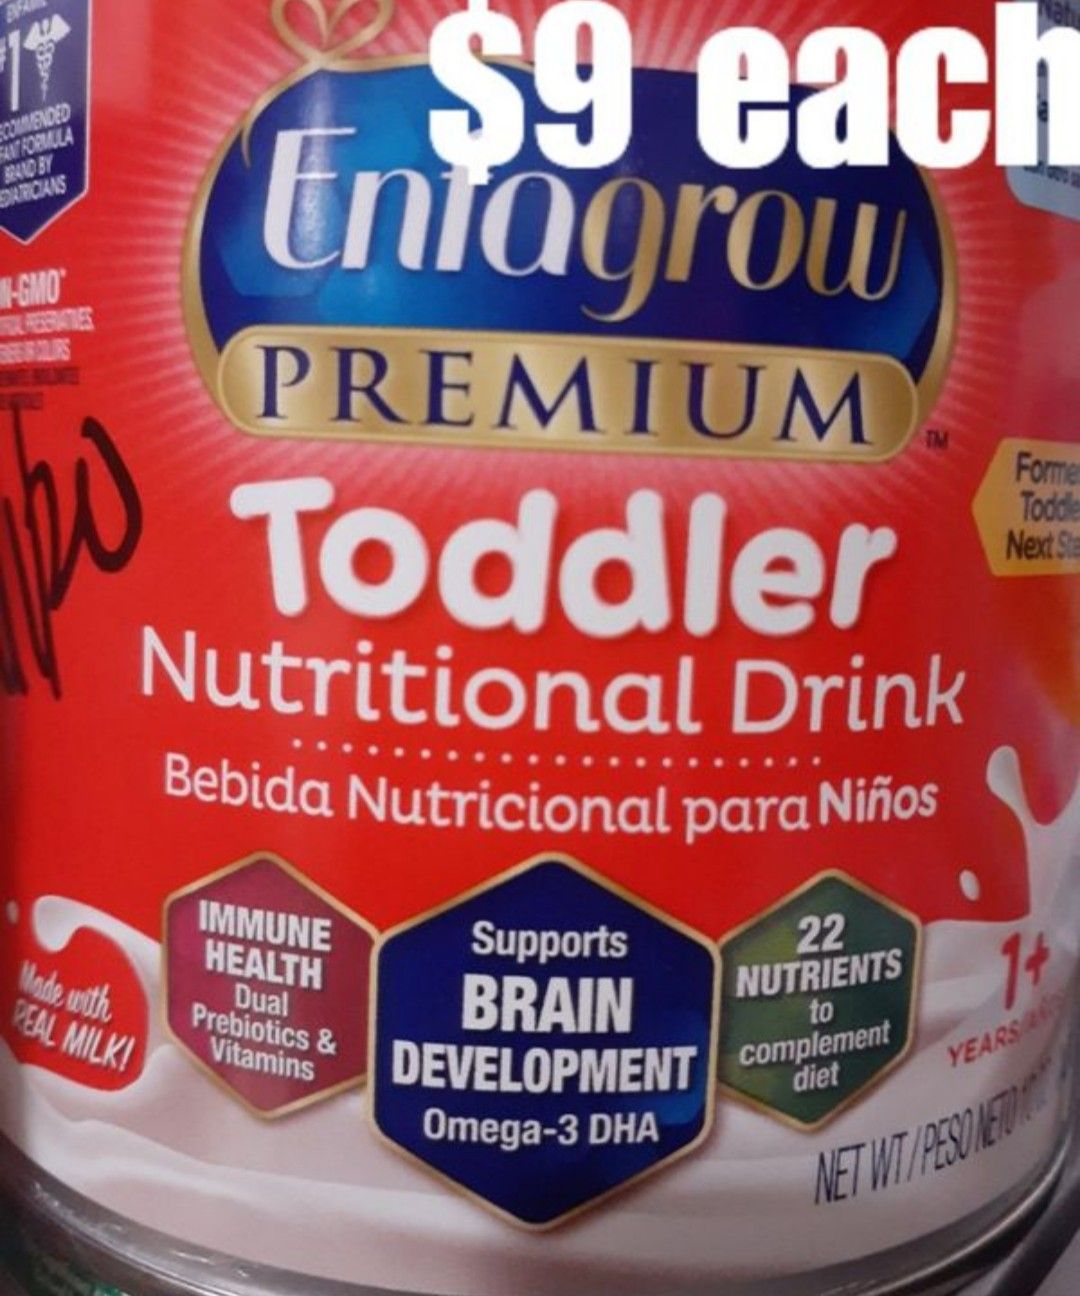 Enfagrow toddler /6 cans available